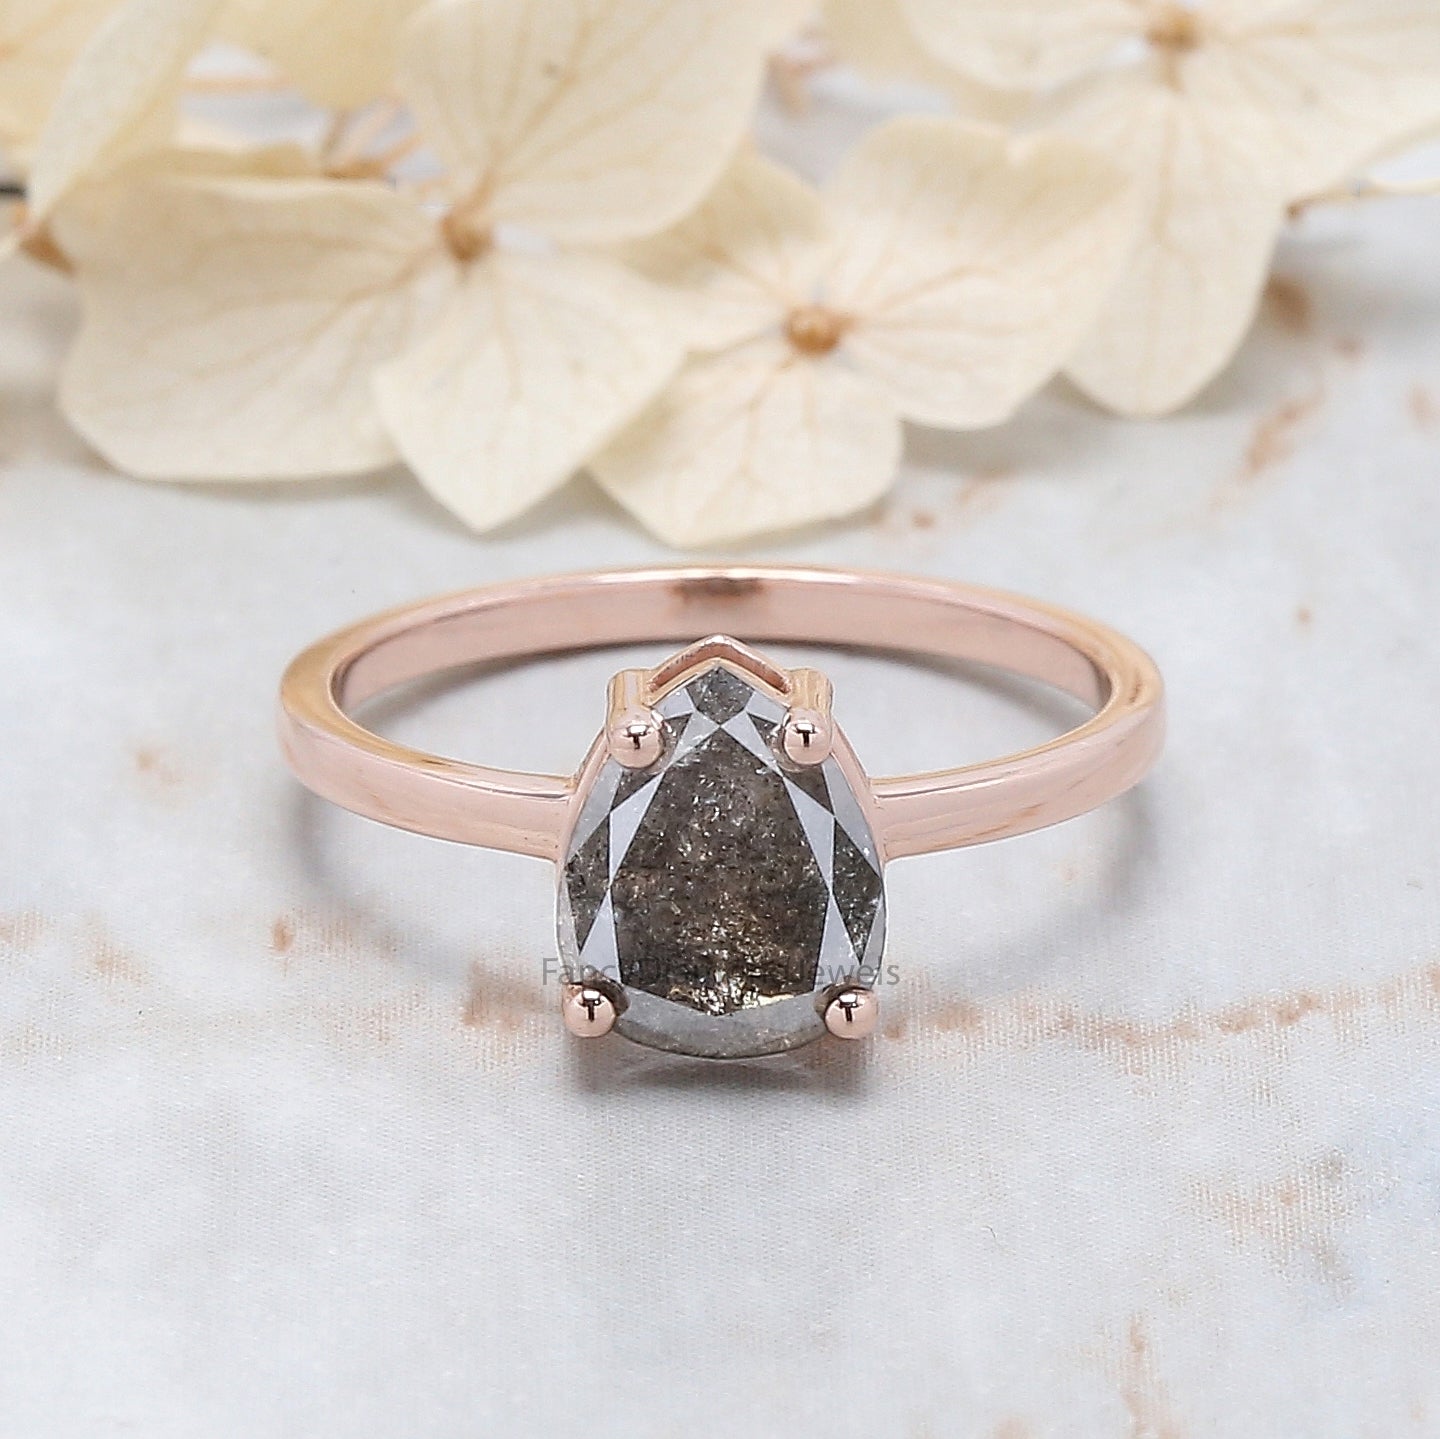 Pear Cut Salt And Pepper Diamond Ring 1.58 Ct 8.45 MM Pear Diamond Ring 14K Solid Rose Gold Silver Engagement Pear Ring Gift For Her QL1666